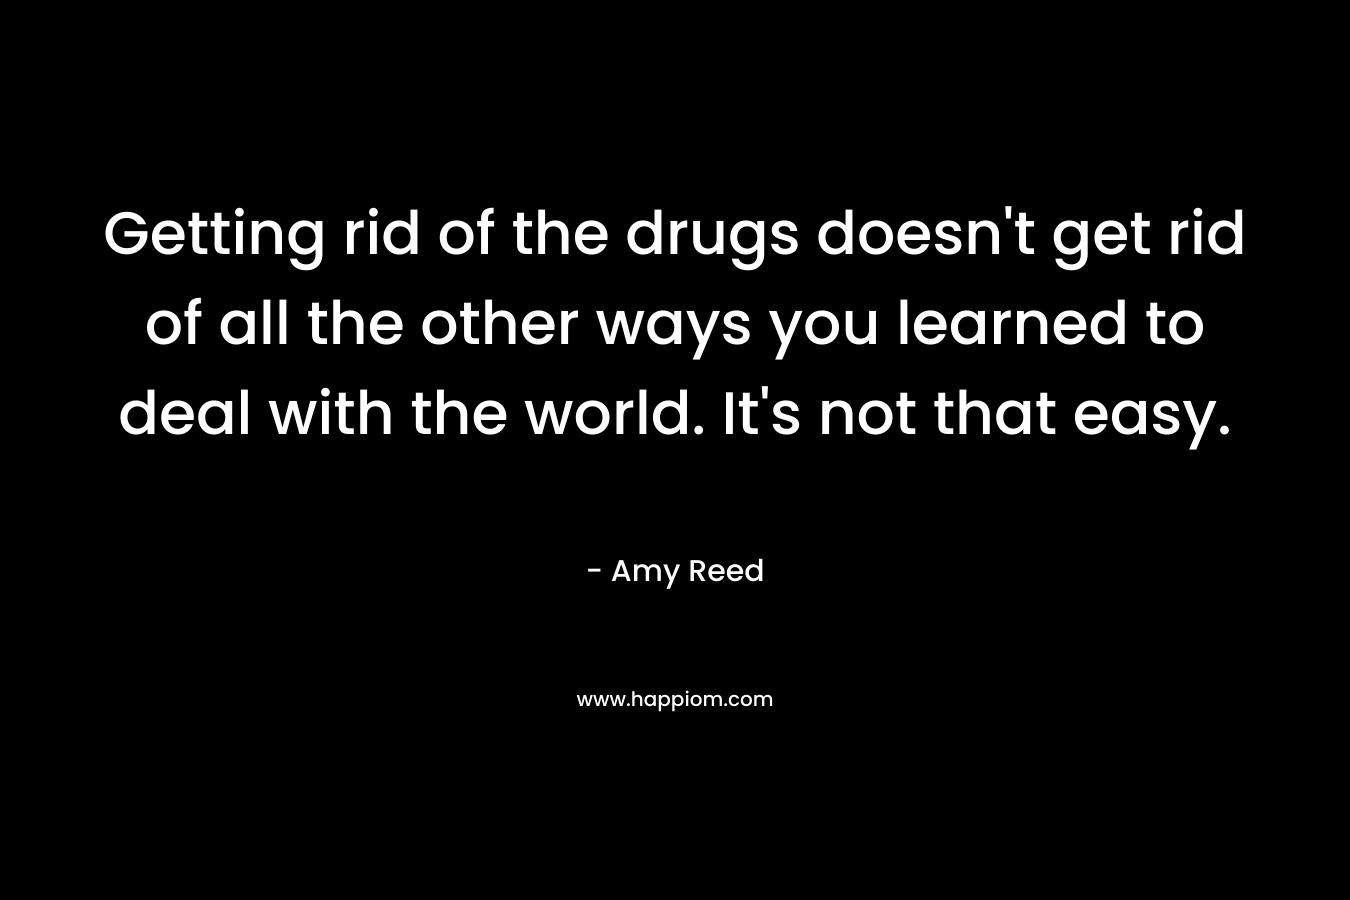 Getting rid of the drugs doesn’t get rid of all the other ways you learned to deal with the world. It’s not that easy. – Amy Reed